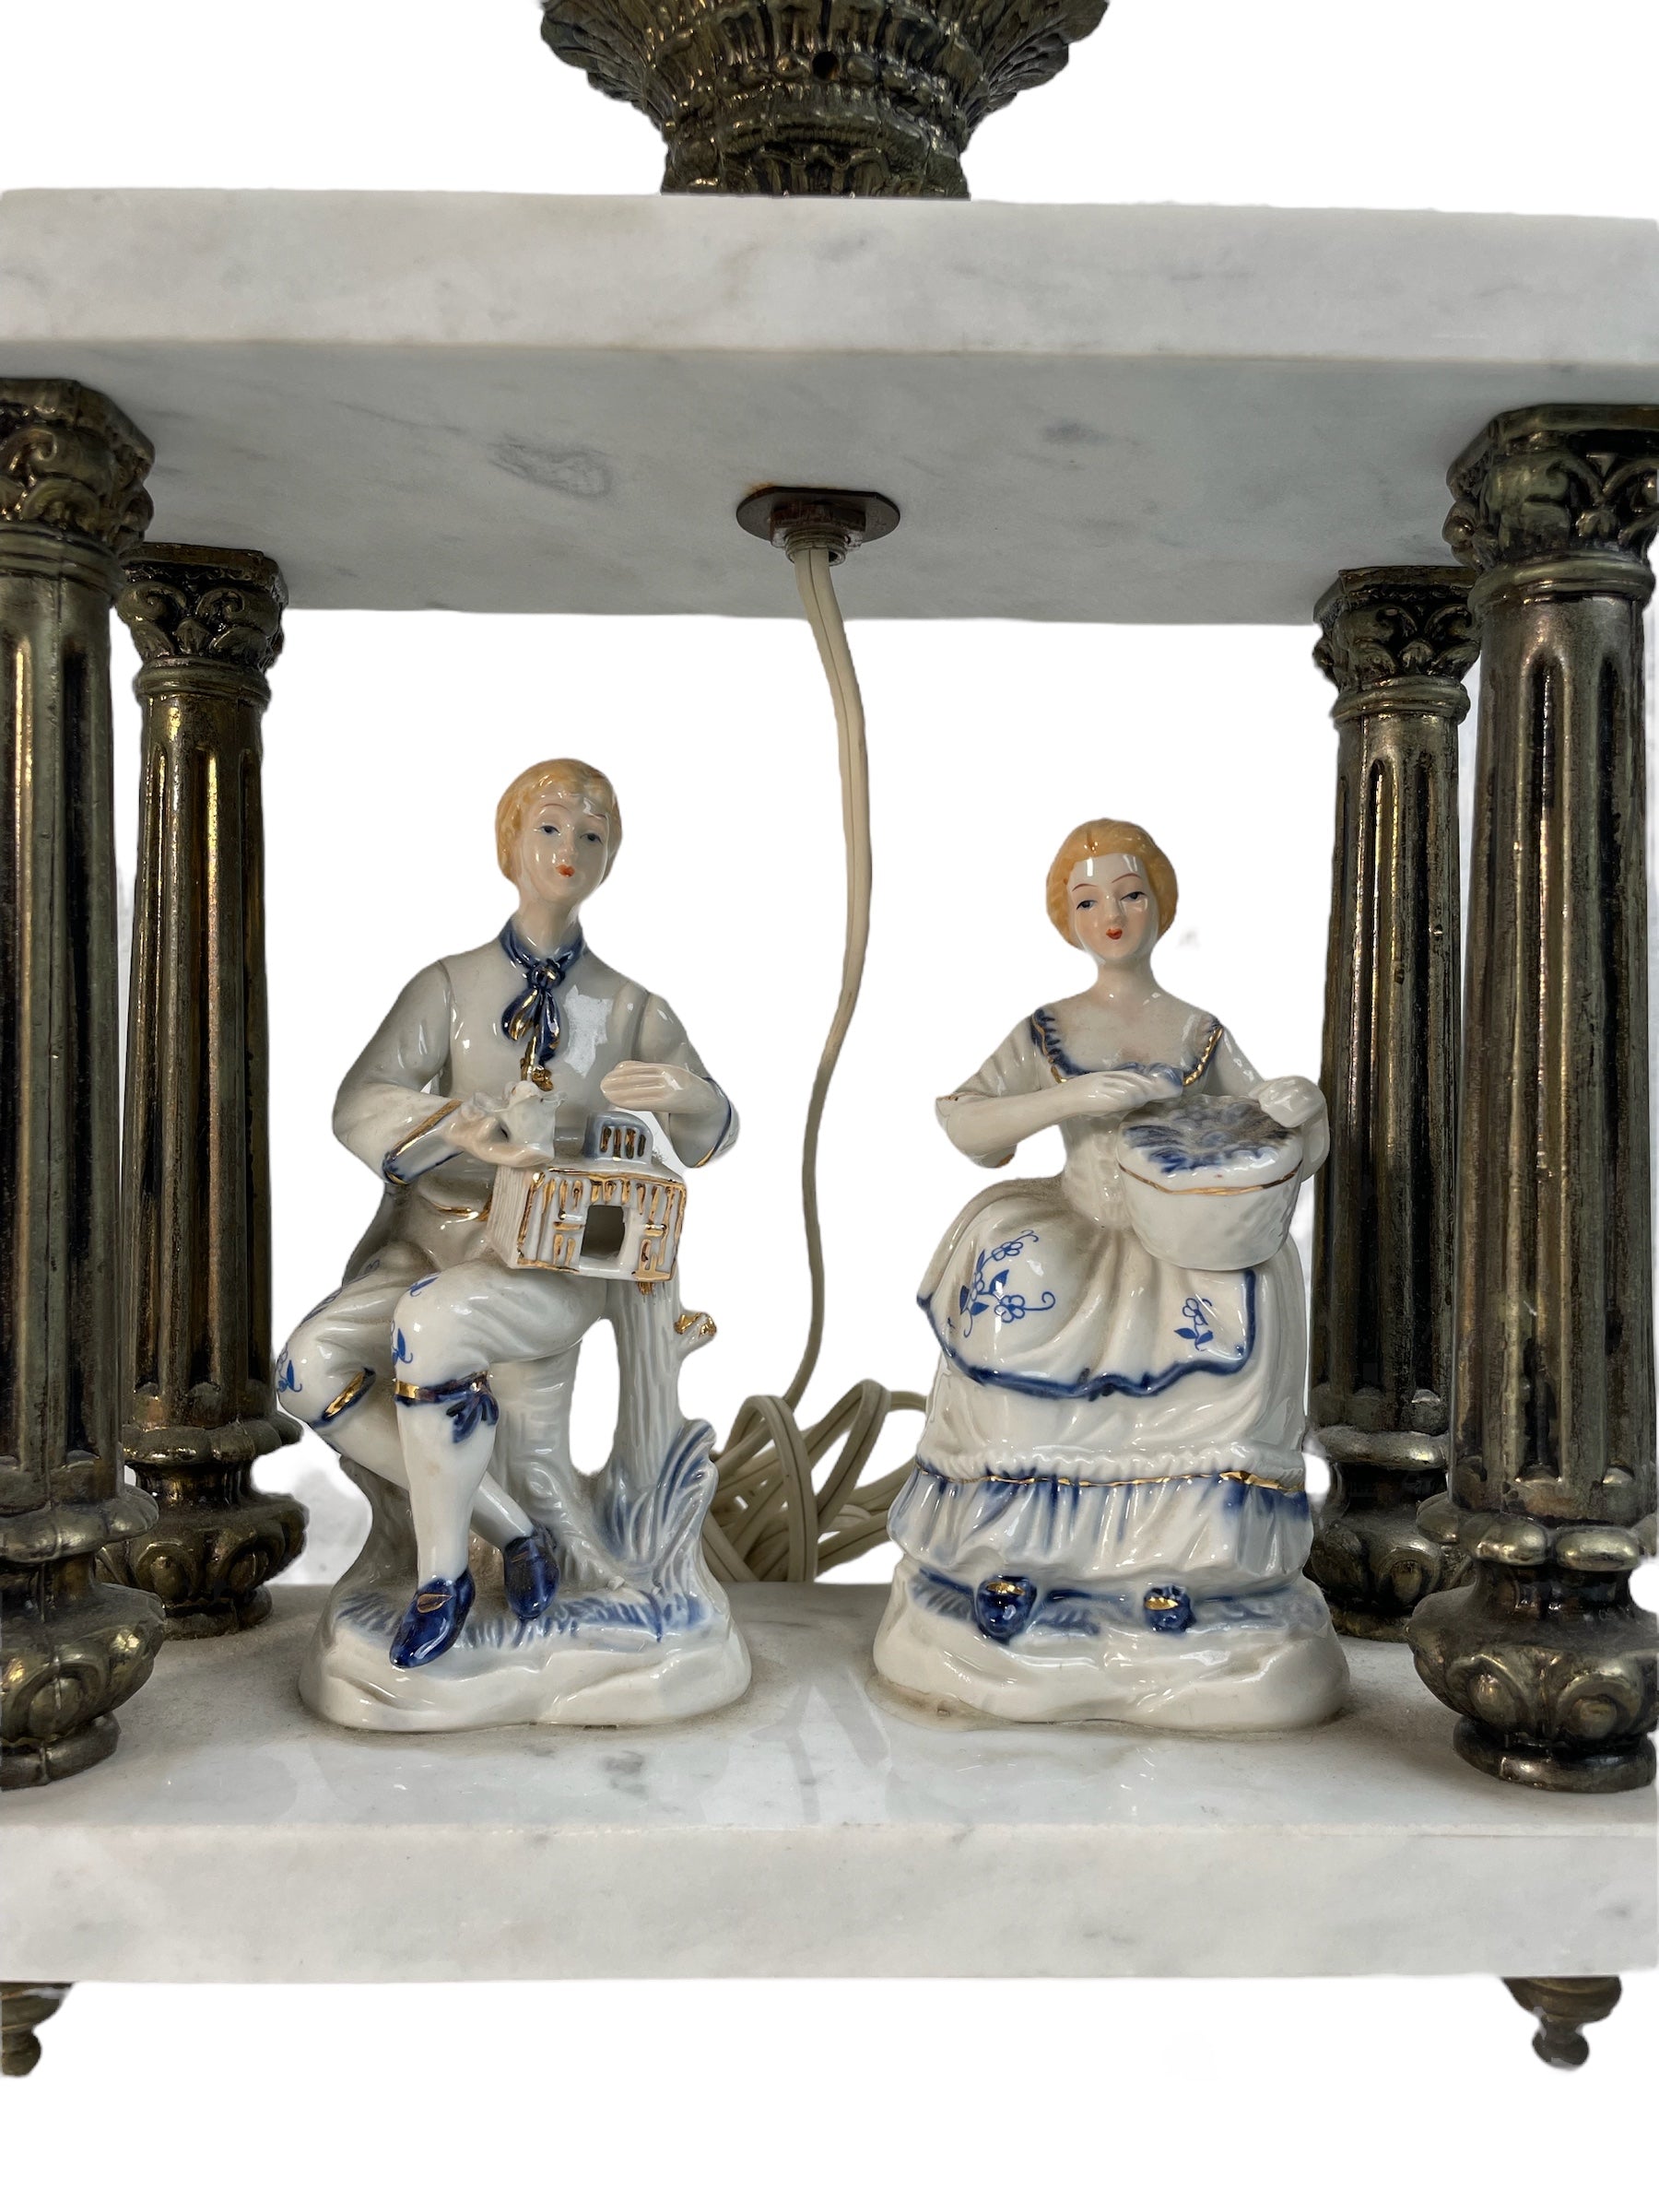 Vintage Murano Lamp featuring delicate Porcelain Collectible Figurines Marble Stand